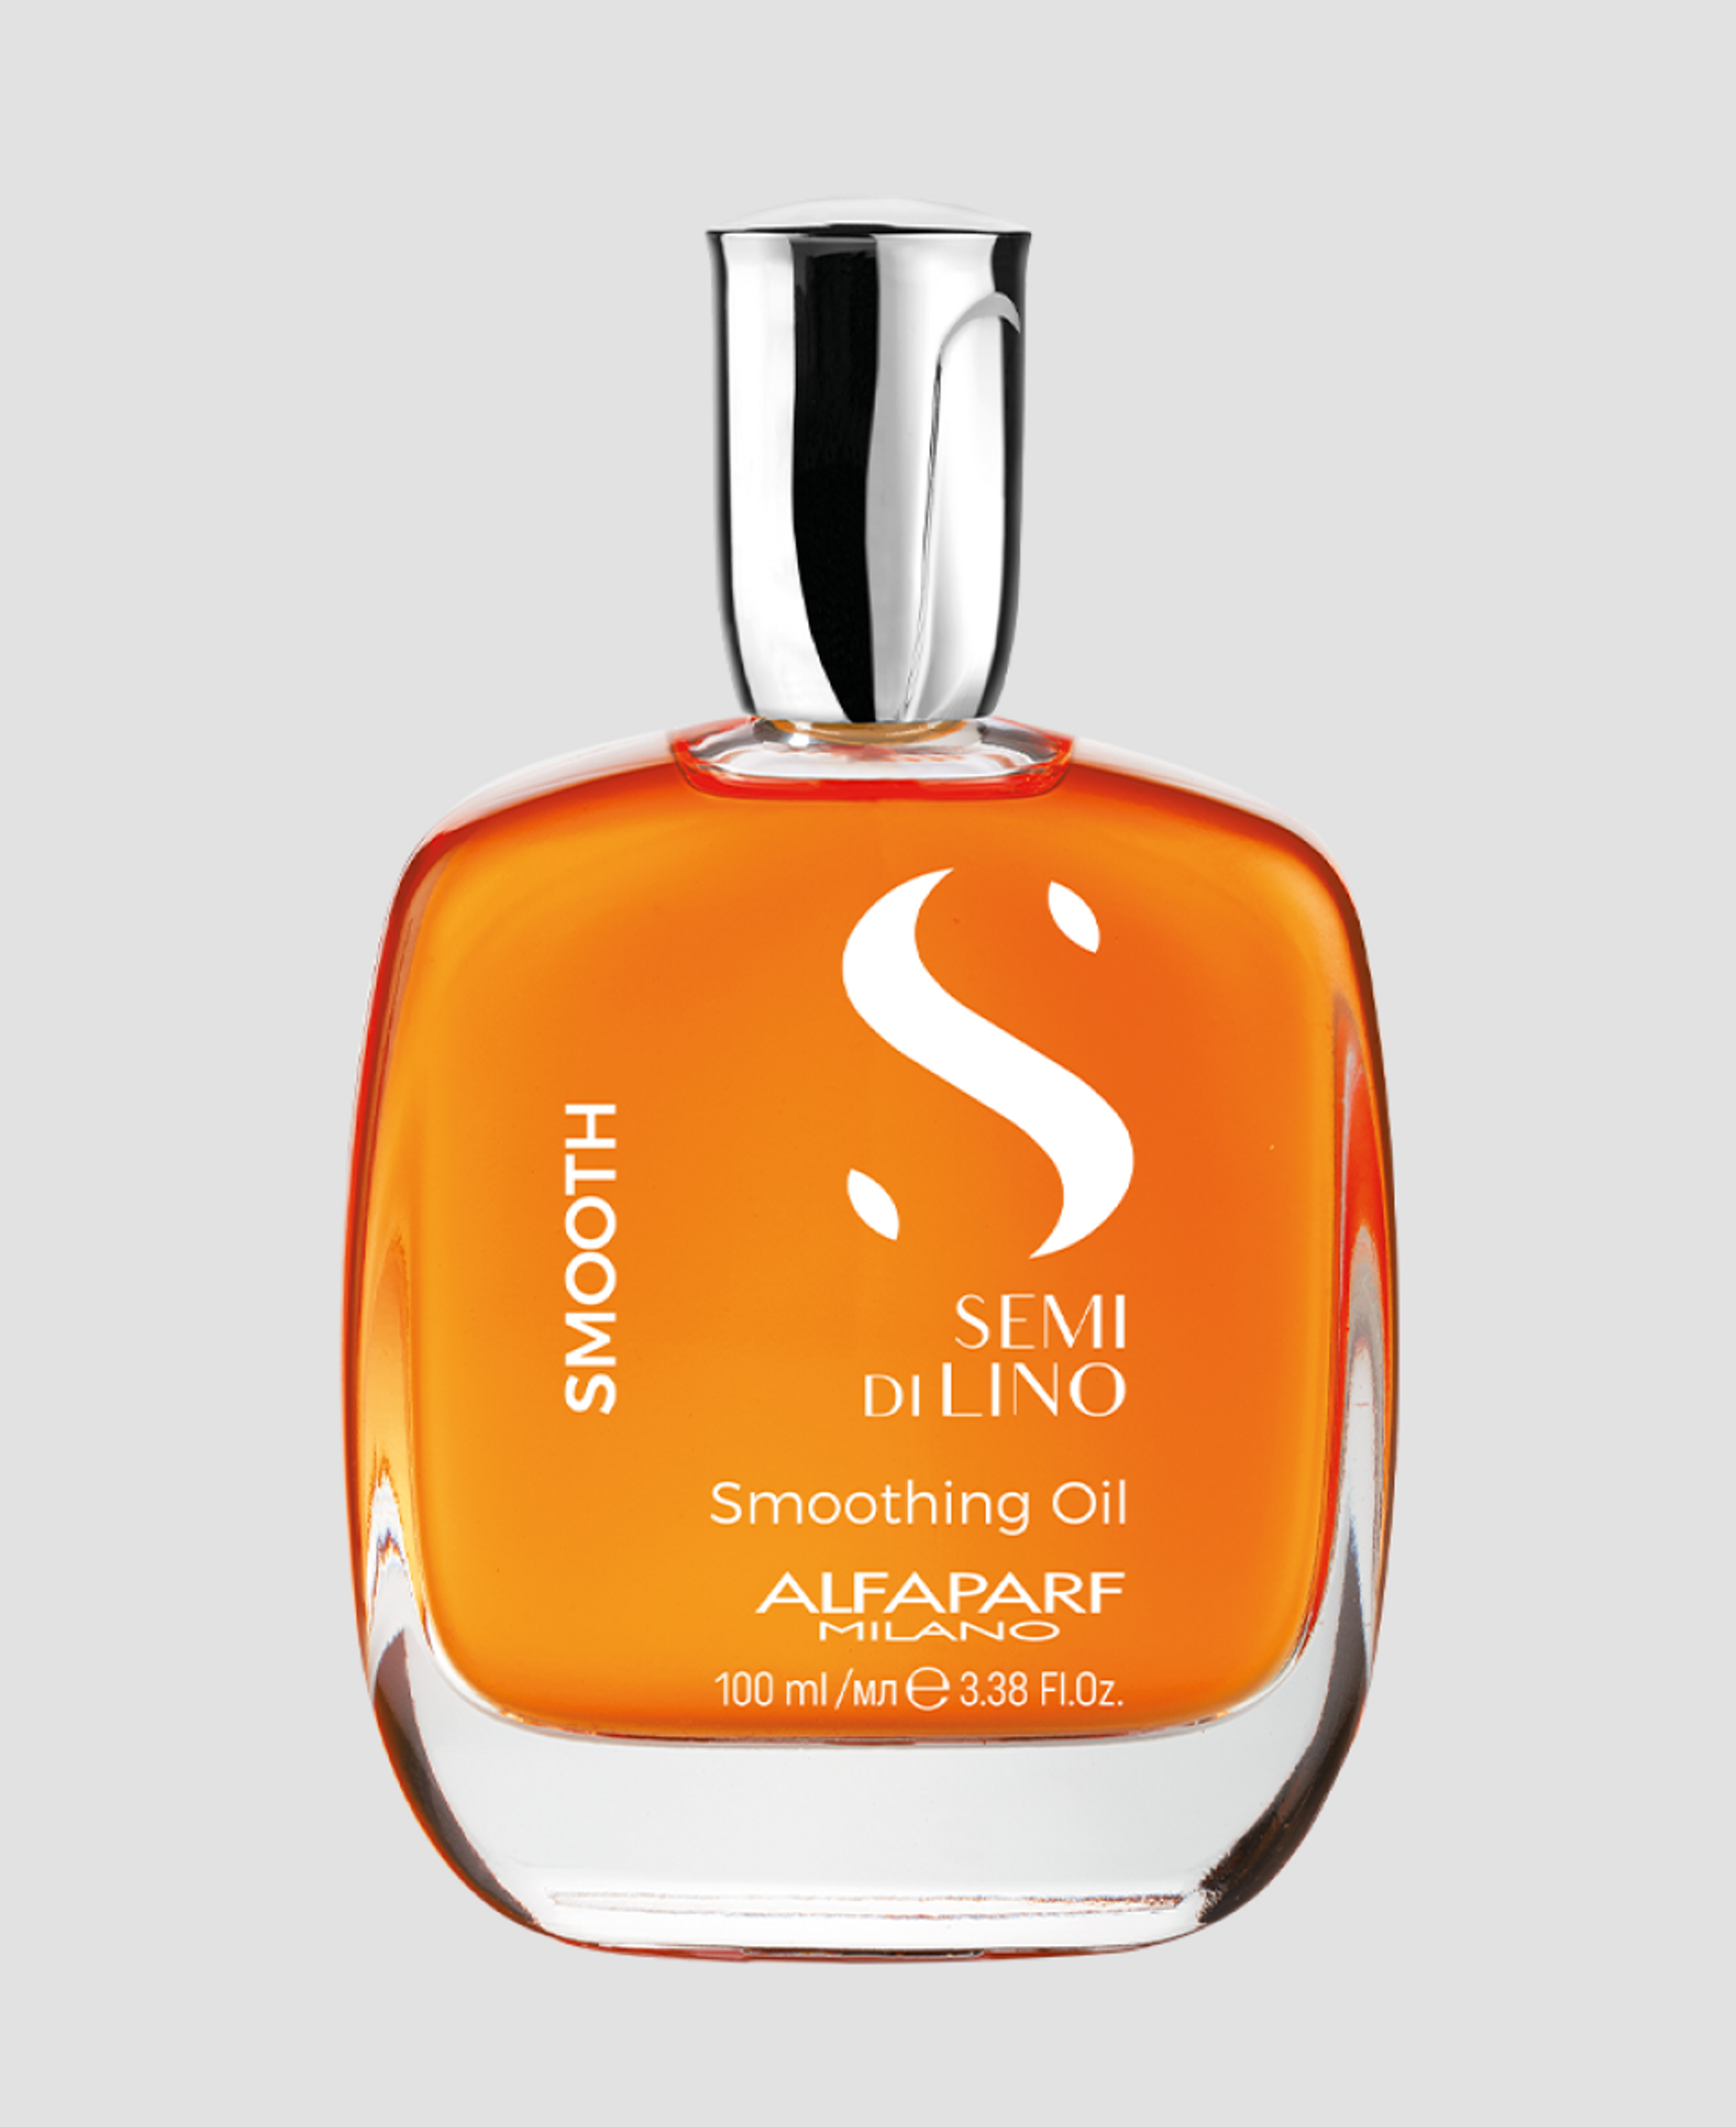 Масло Alfaparf Milano Sdl Smoothing Oil